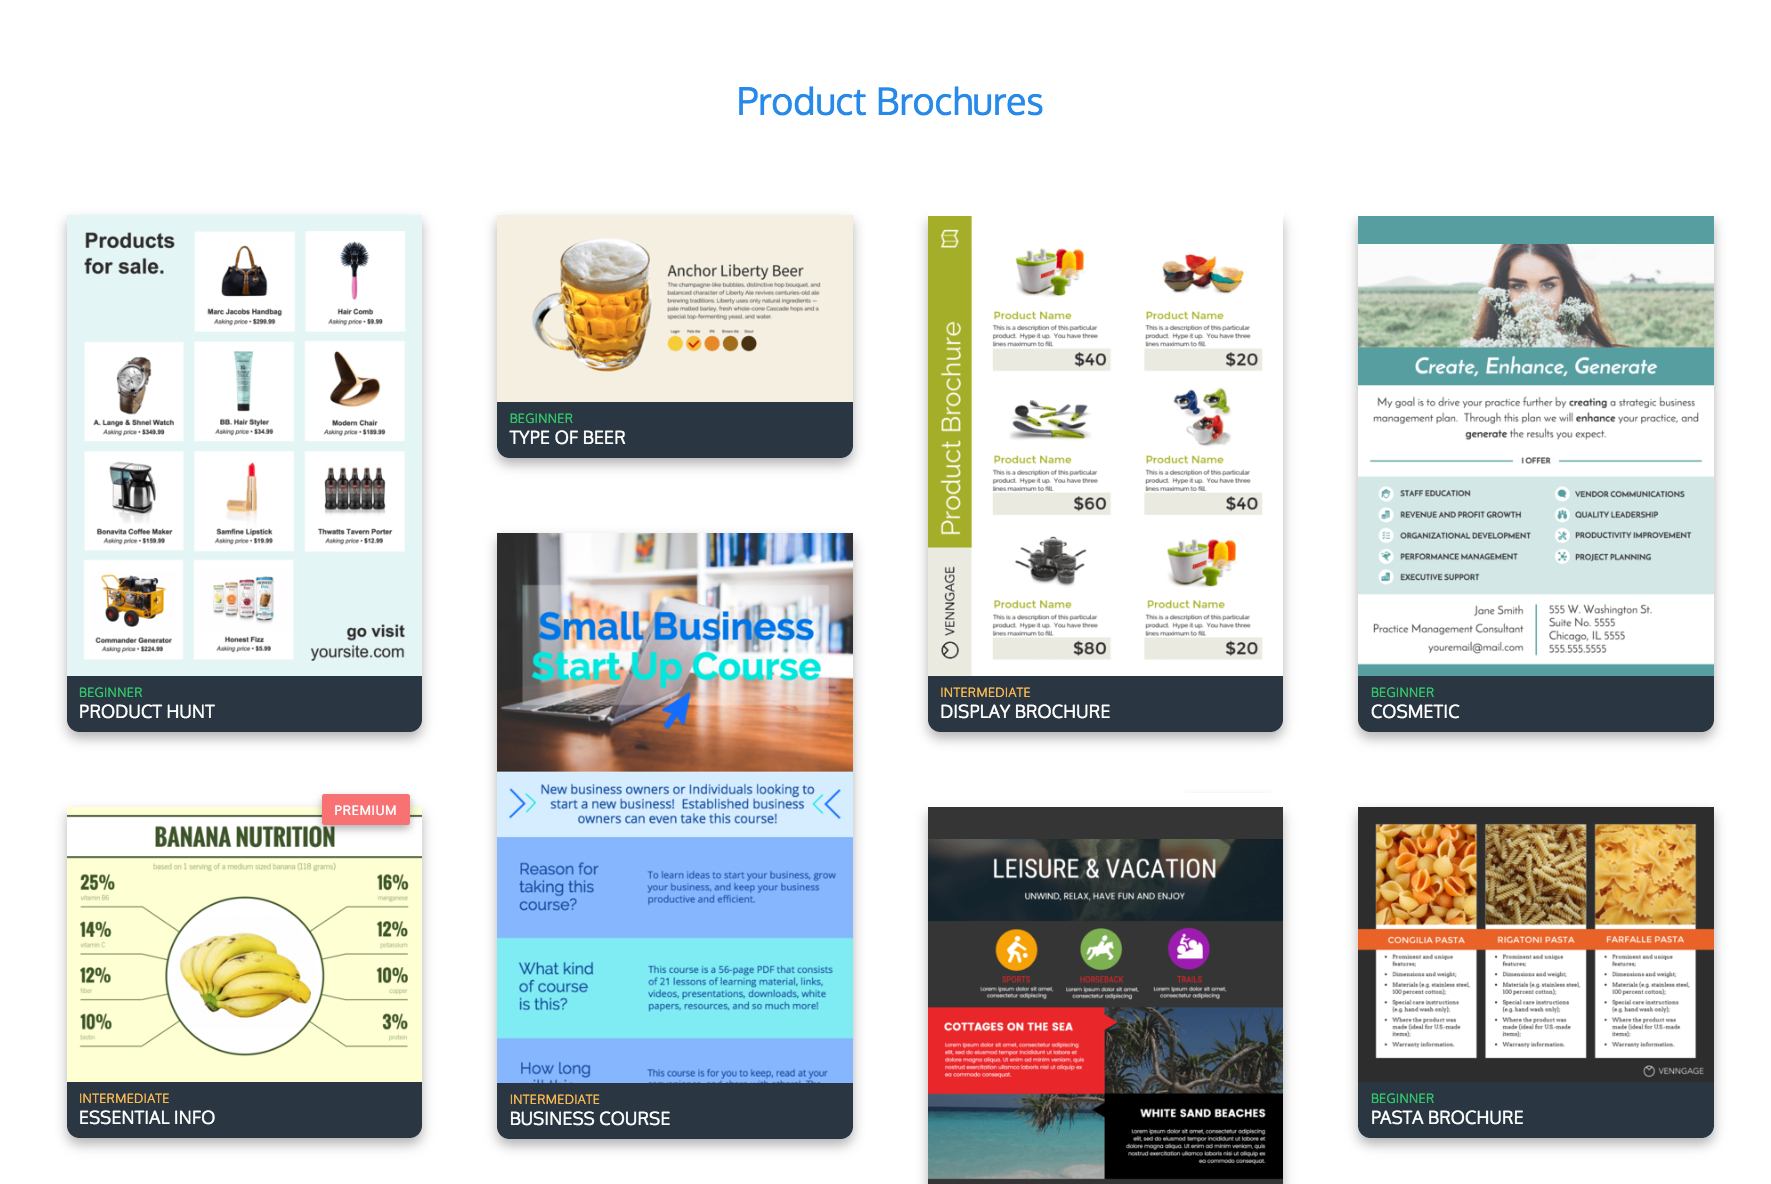 Free Brochure Maker: How To Make A Brochure With Online Free Brochure Design Templates